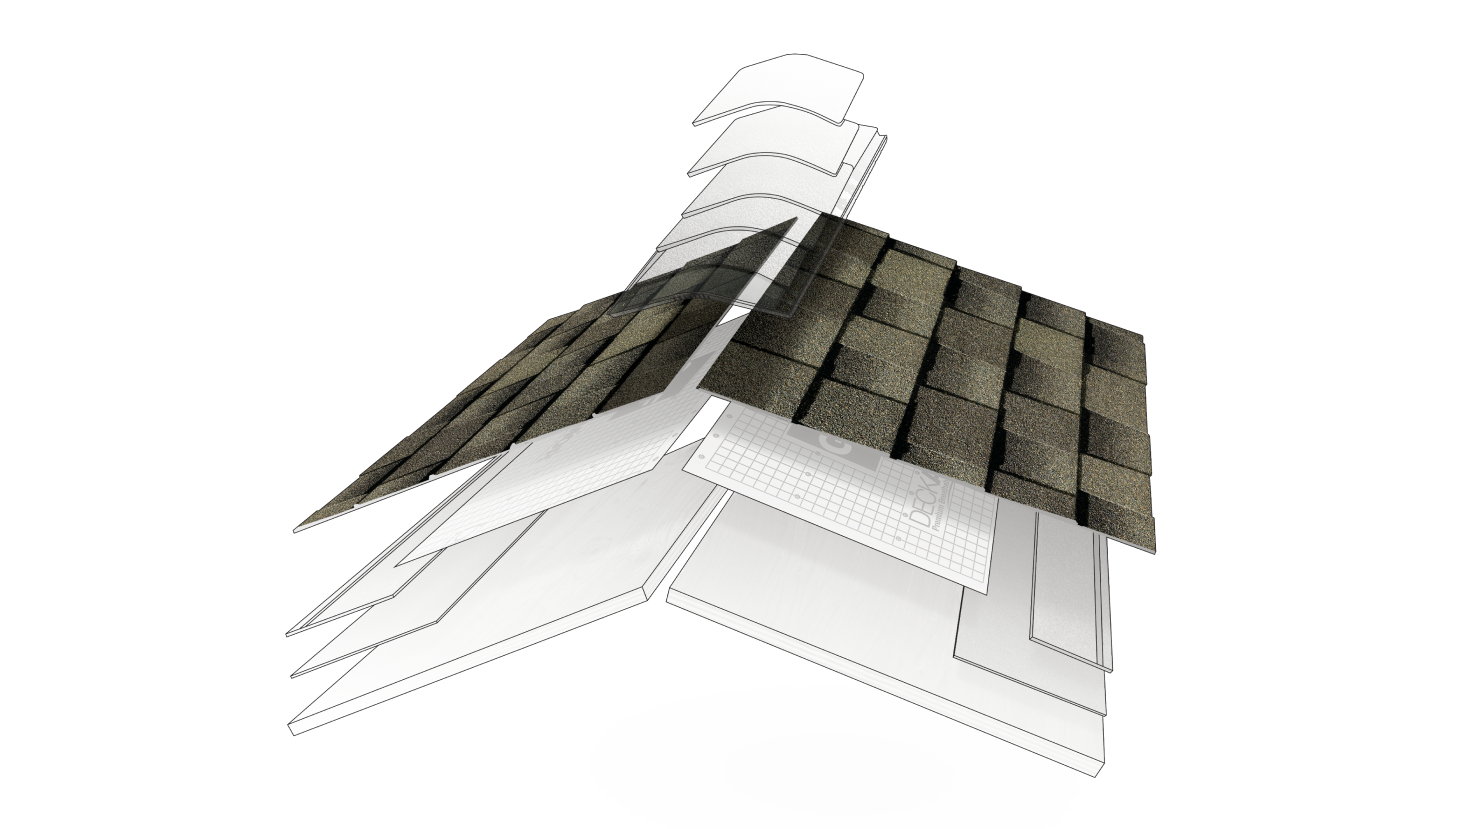 Components of the GAF Lifetime Roofing System